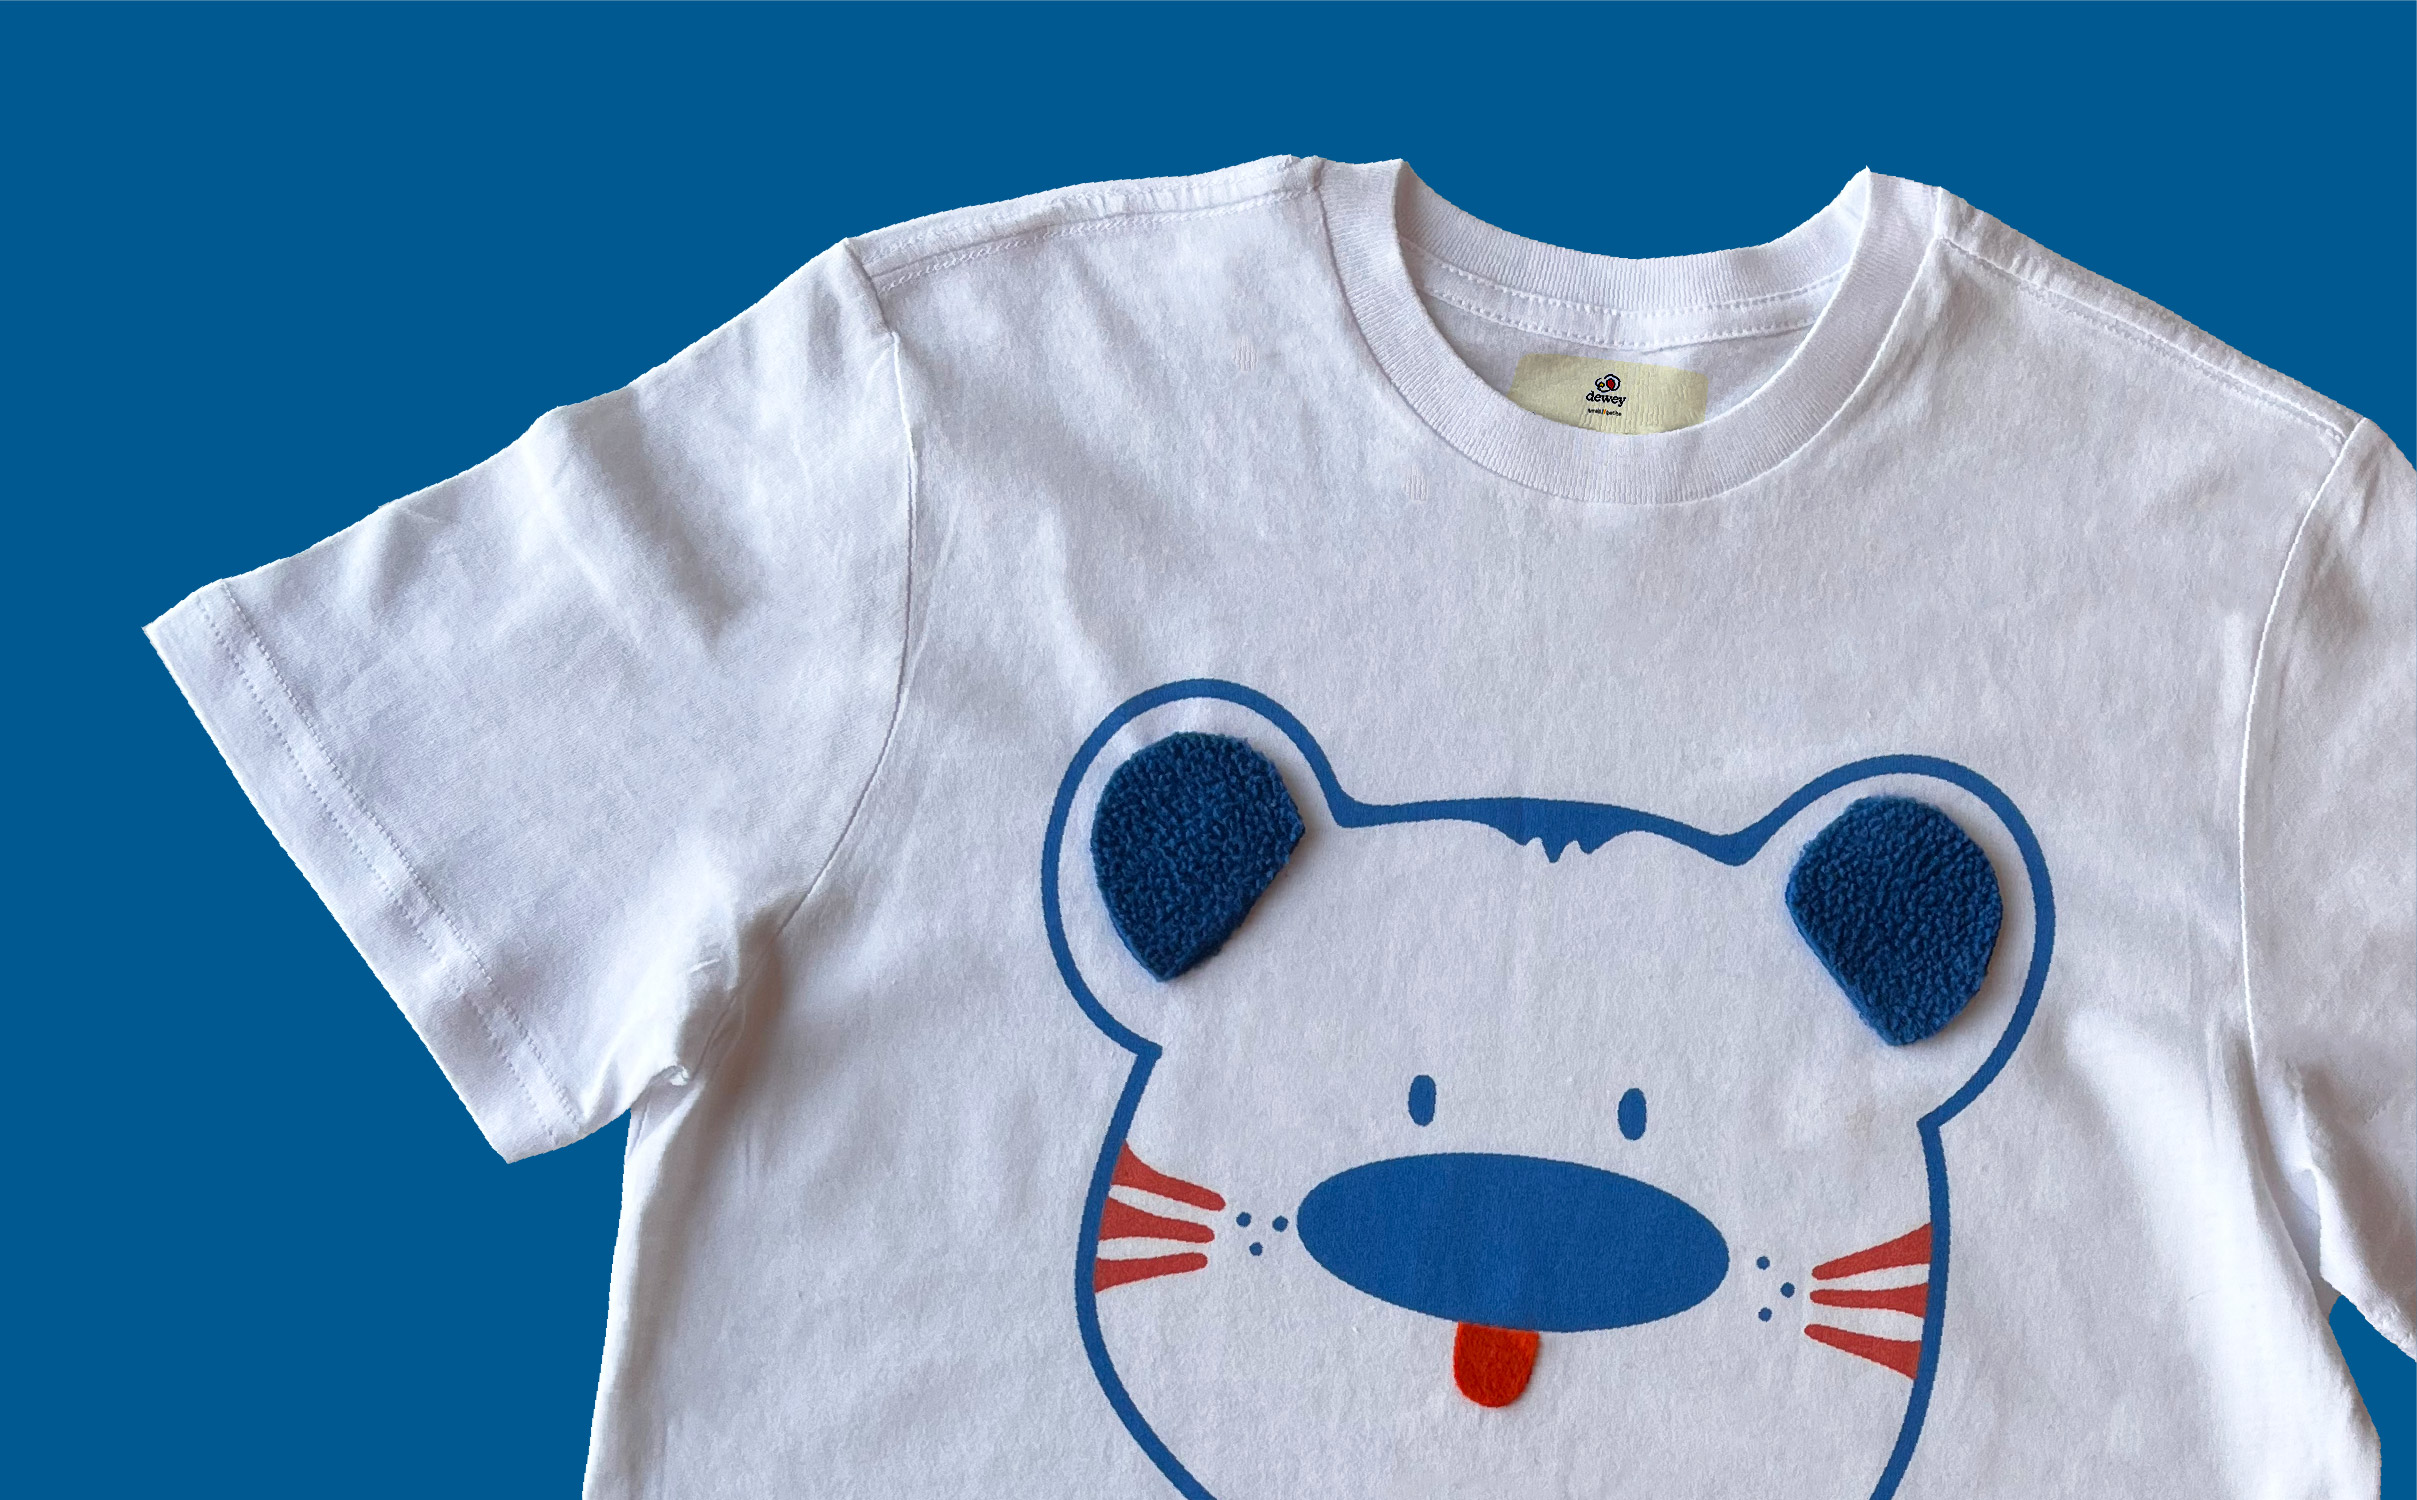 Close-up of the bear Dewey t-shirt that has fabric patches on the ears and mouth.